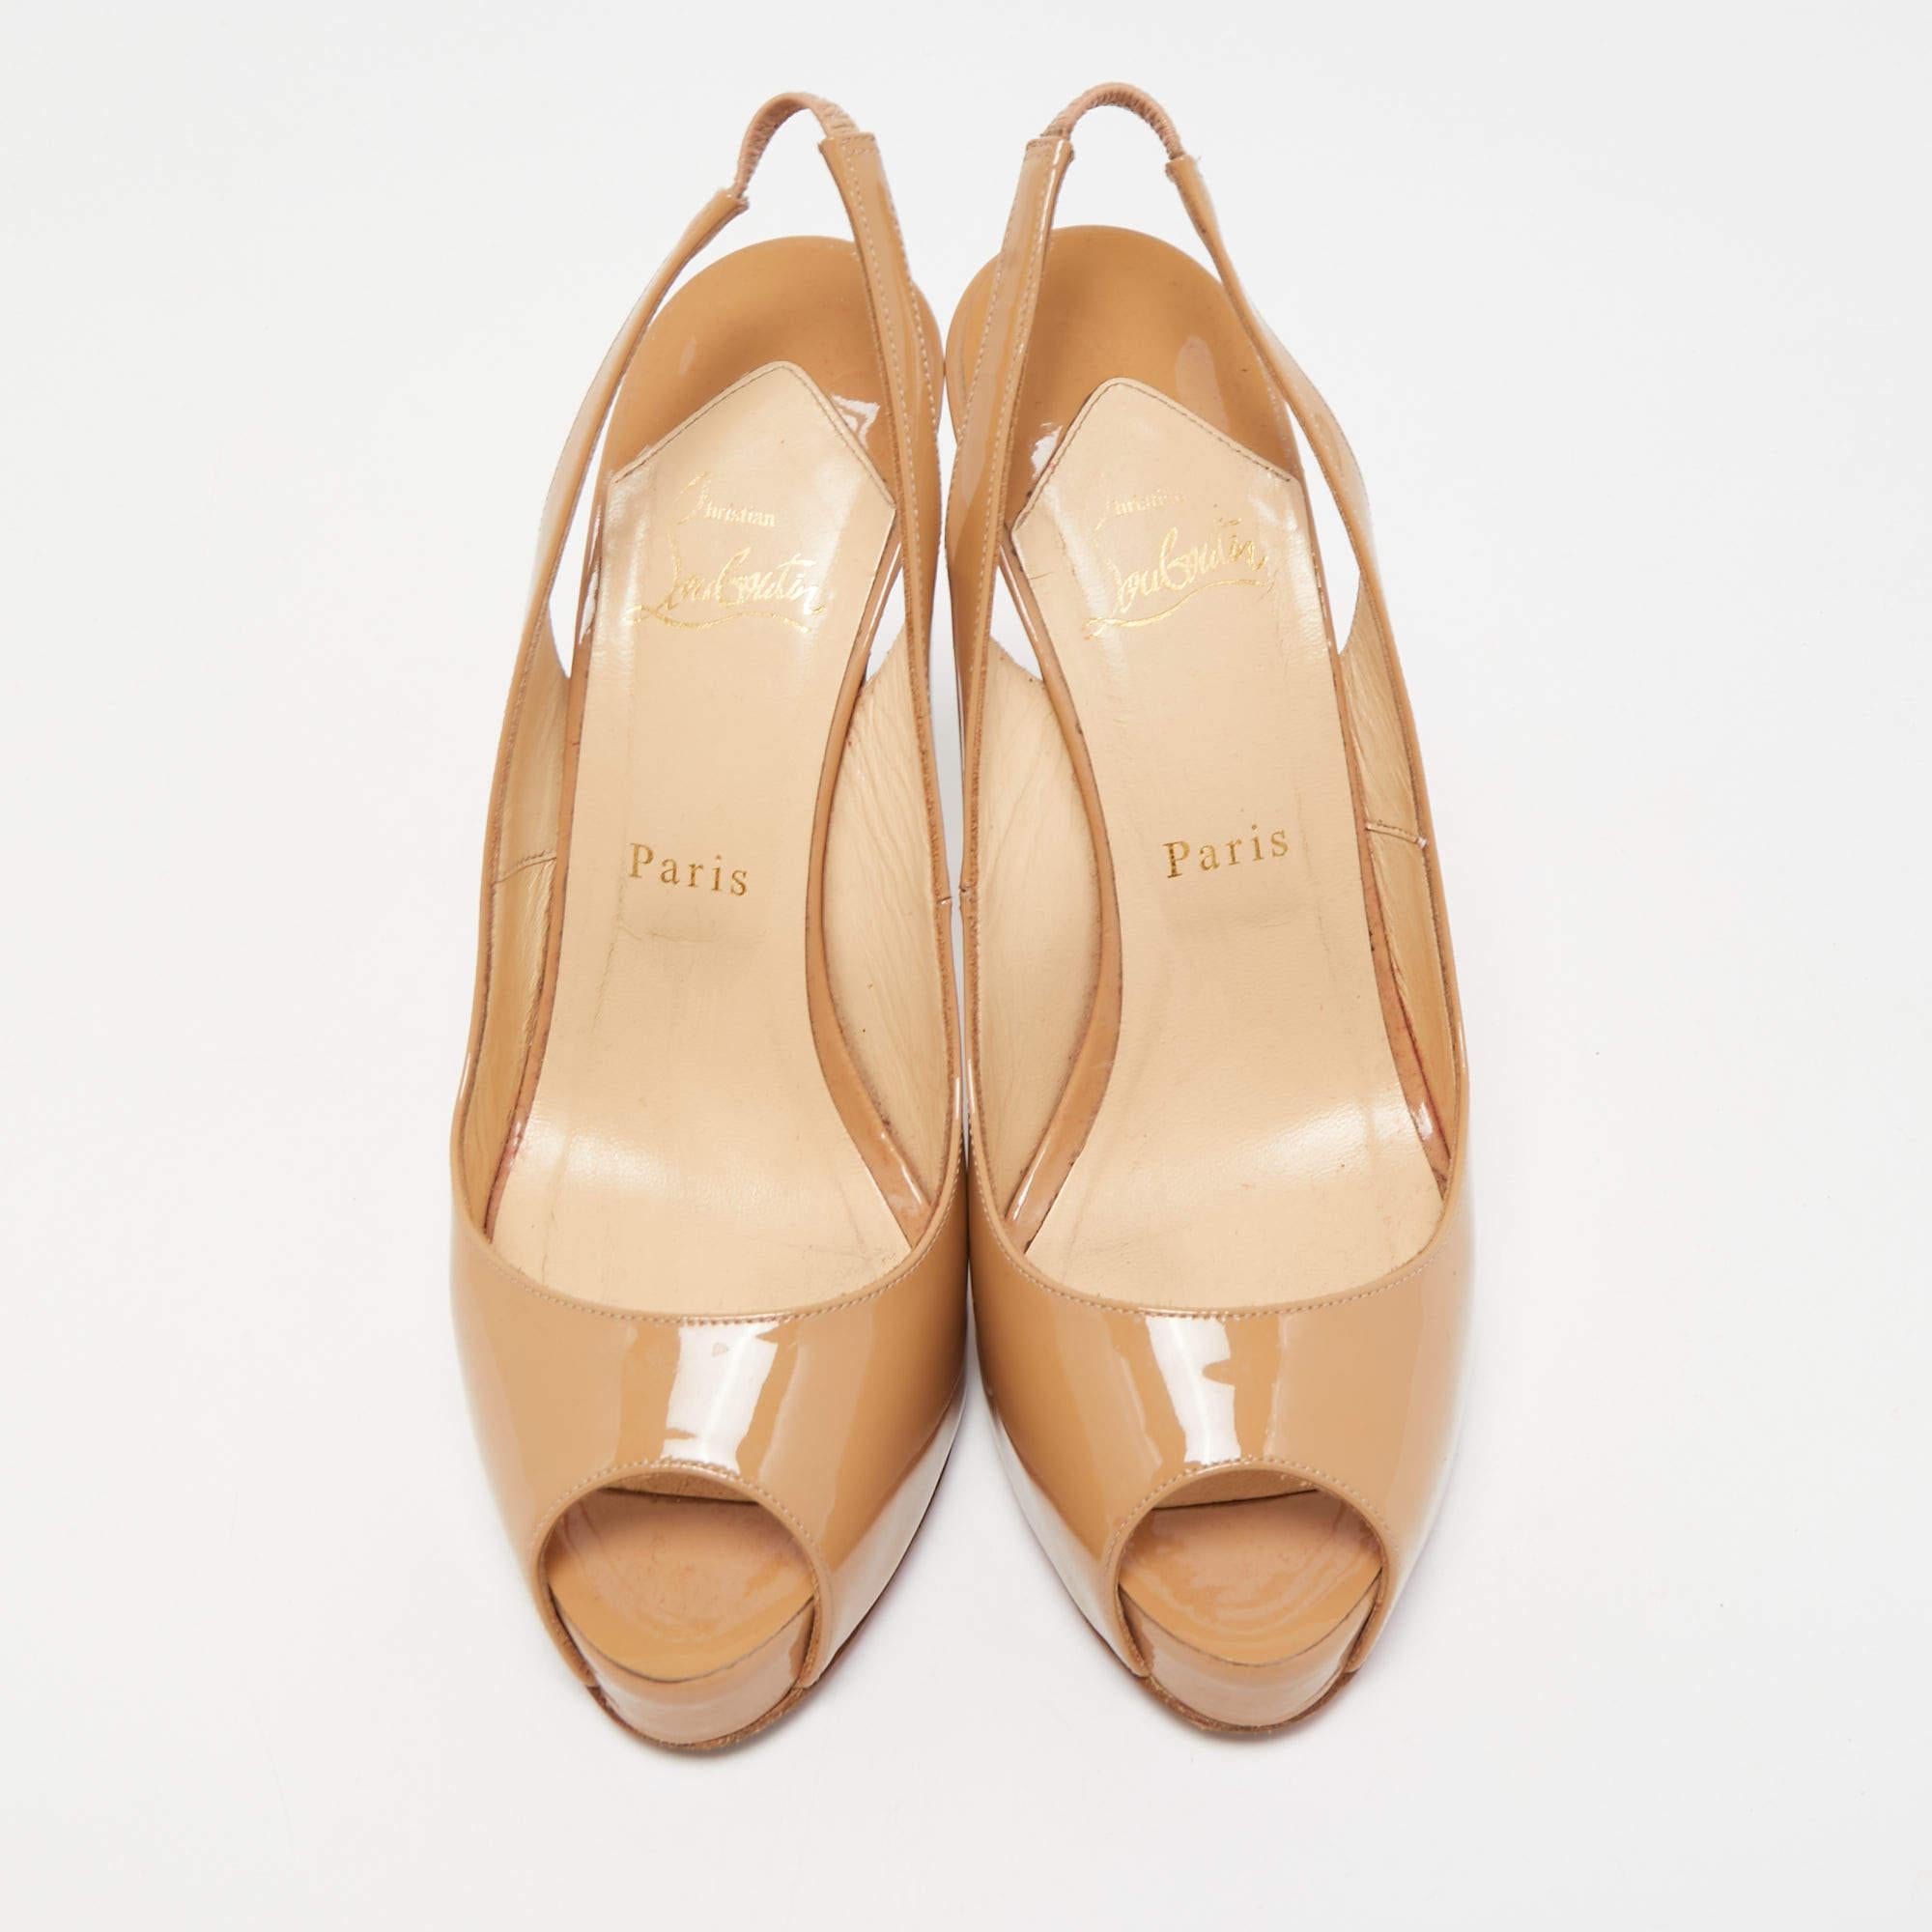 Christian Louboutin Beige Patent Leather Private Number Sandals Size 39 For Sale 5